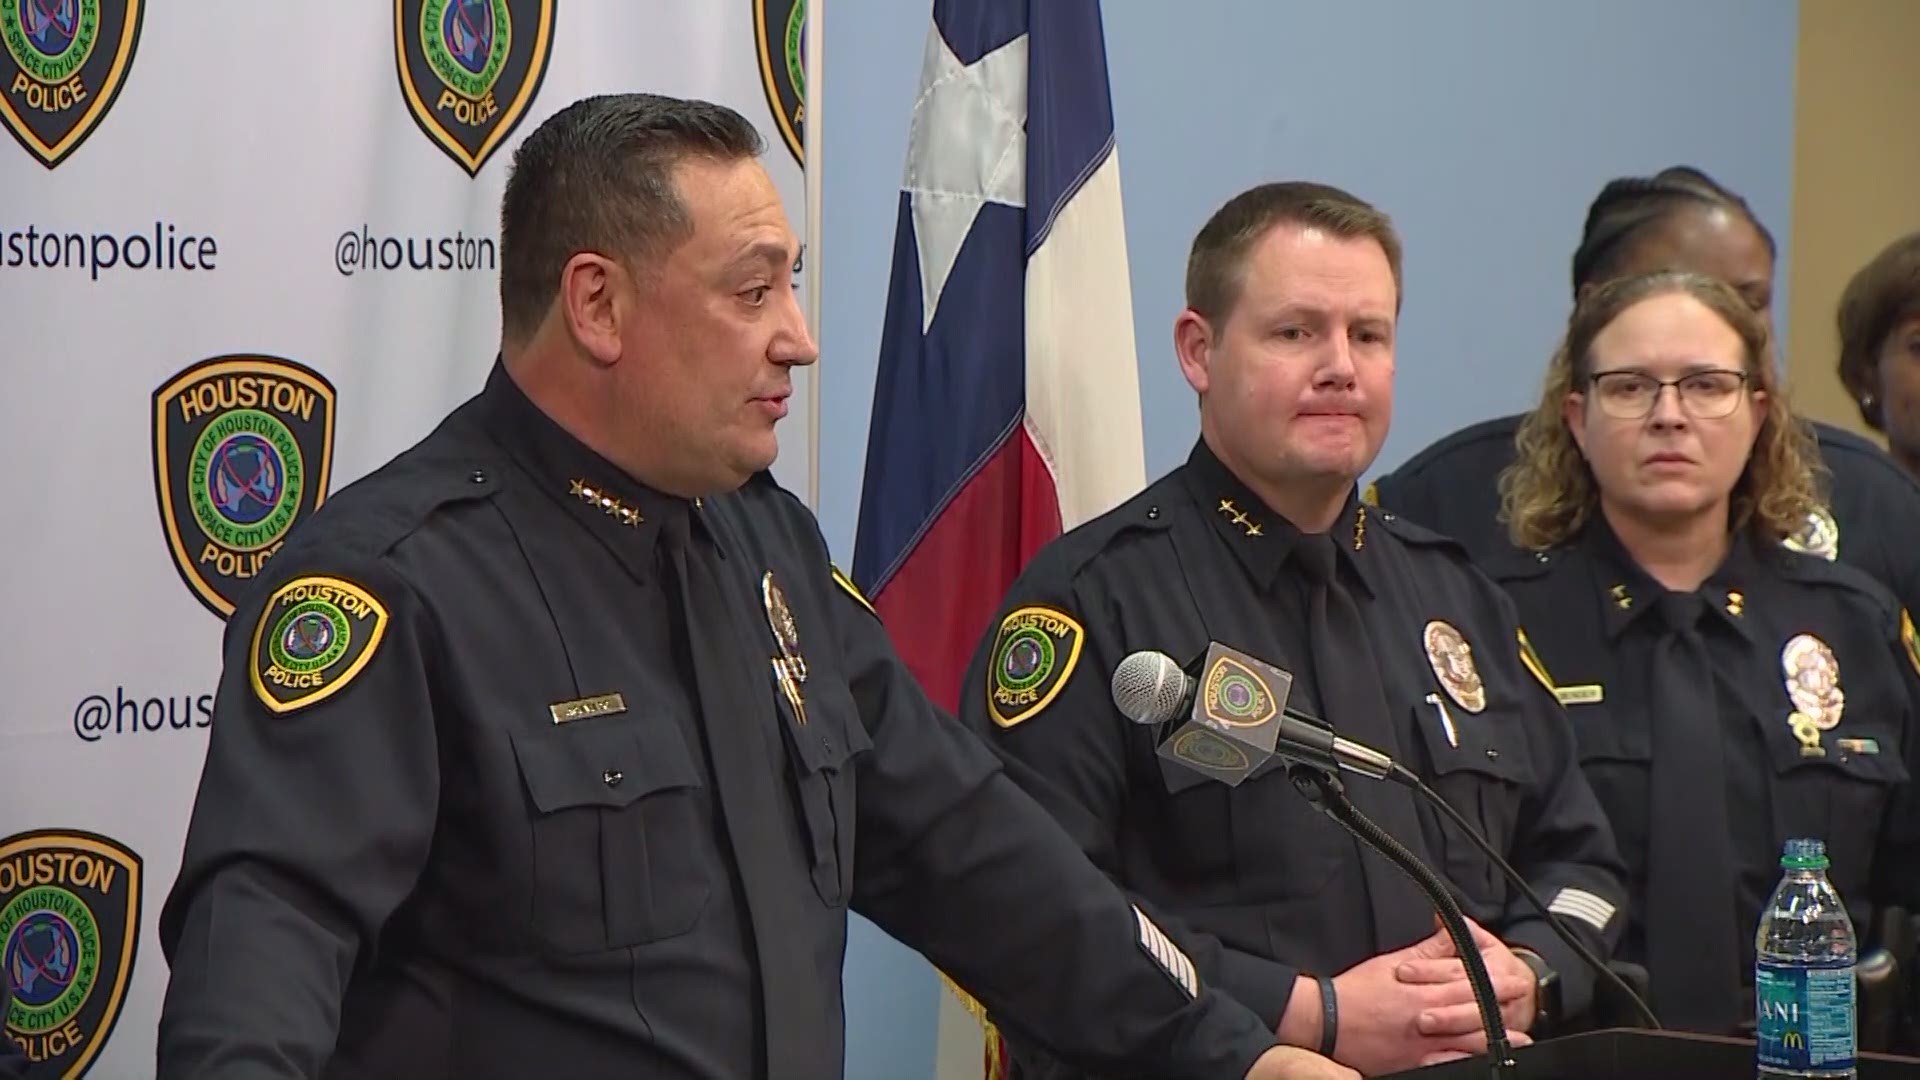 Houston Police Chief Art Acevedo condemned comments made earlier this week by the union president, who appeared to blame the shooting of four HPD officers on anti-police rhetoric.